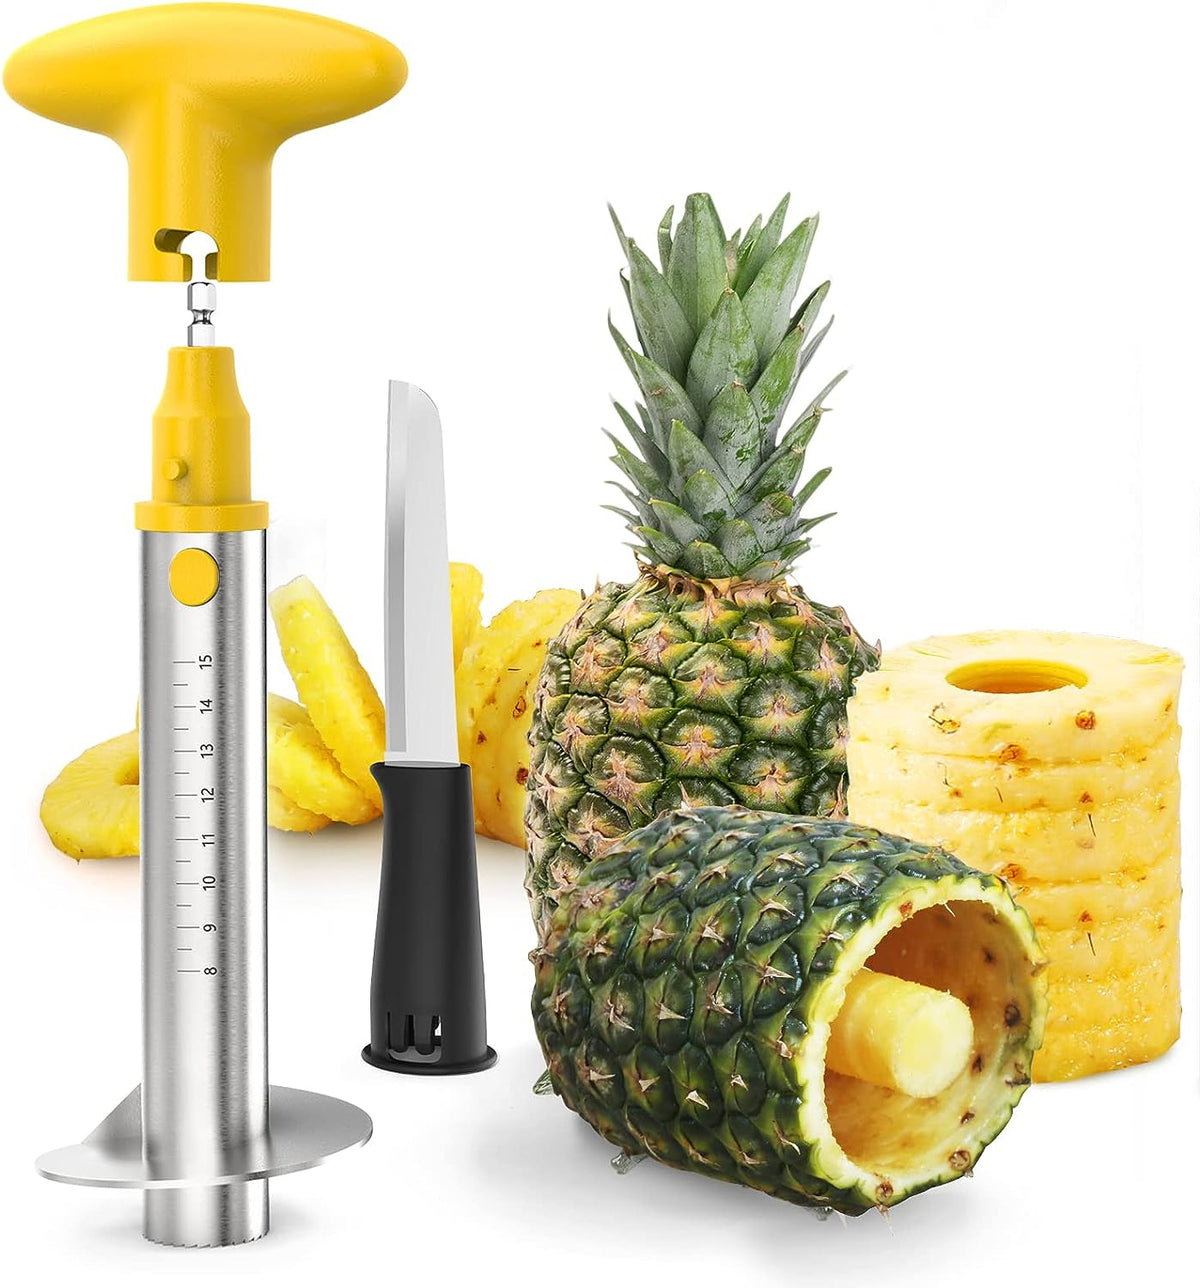 Newness Pineapple Corer with Knife, [Upgraded, Electric & Manual]